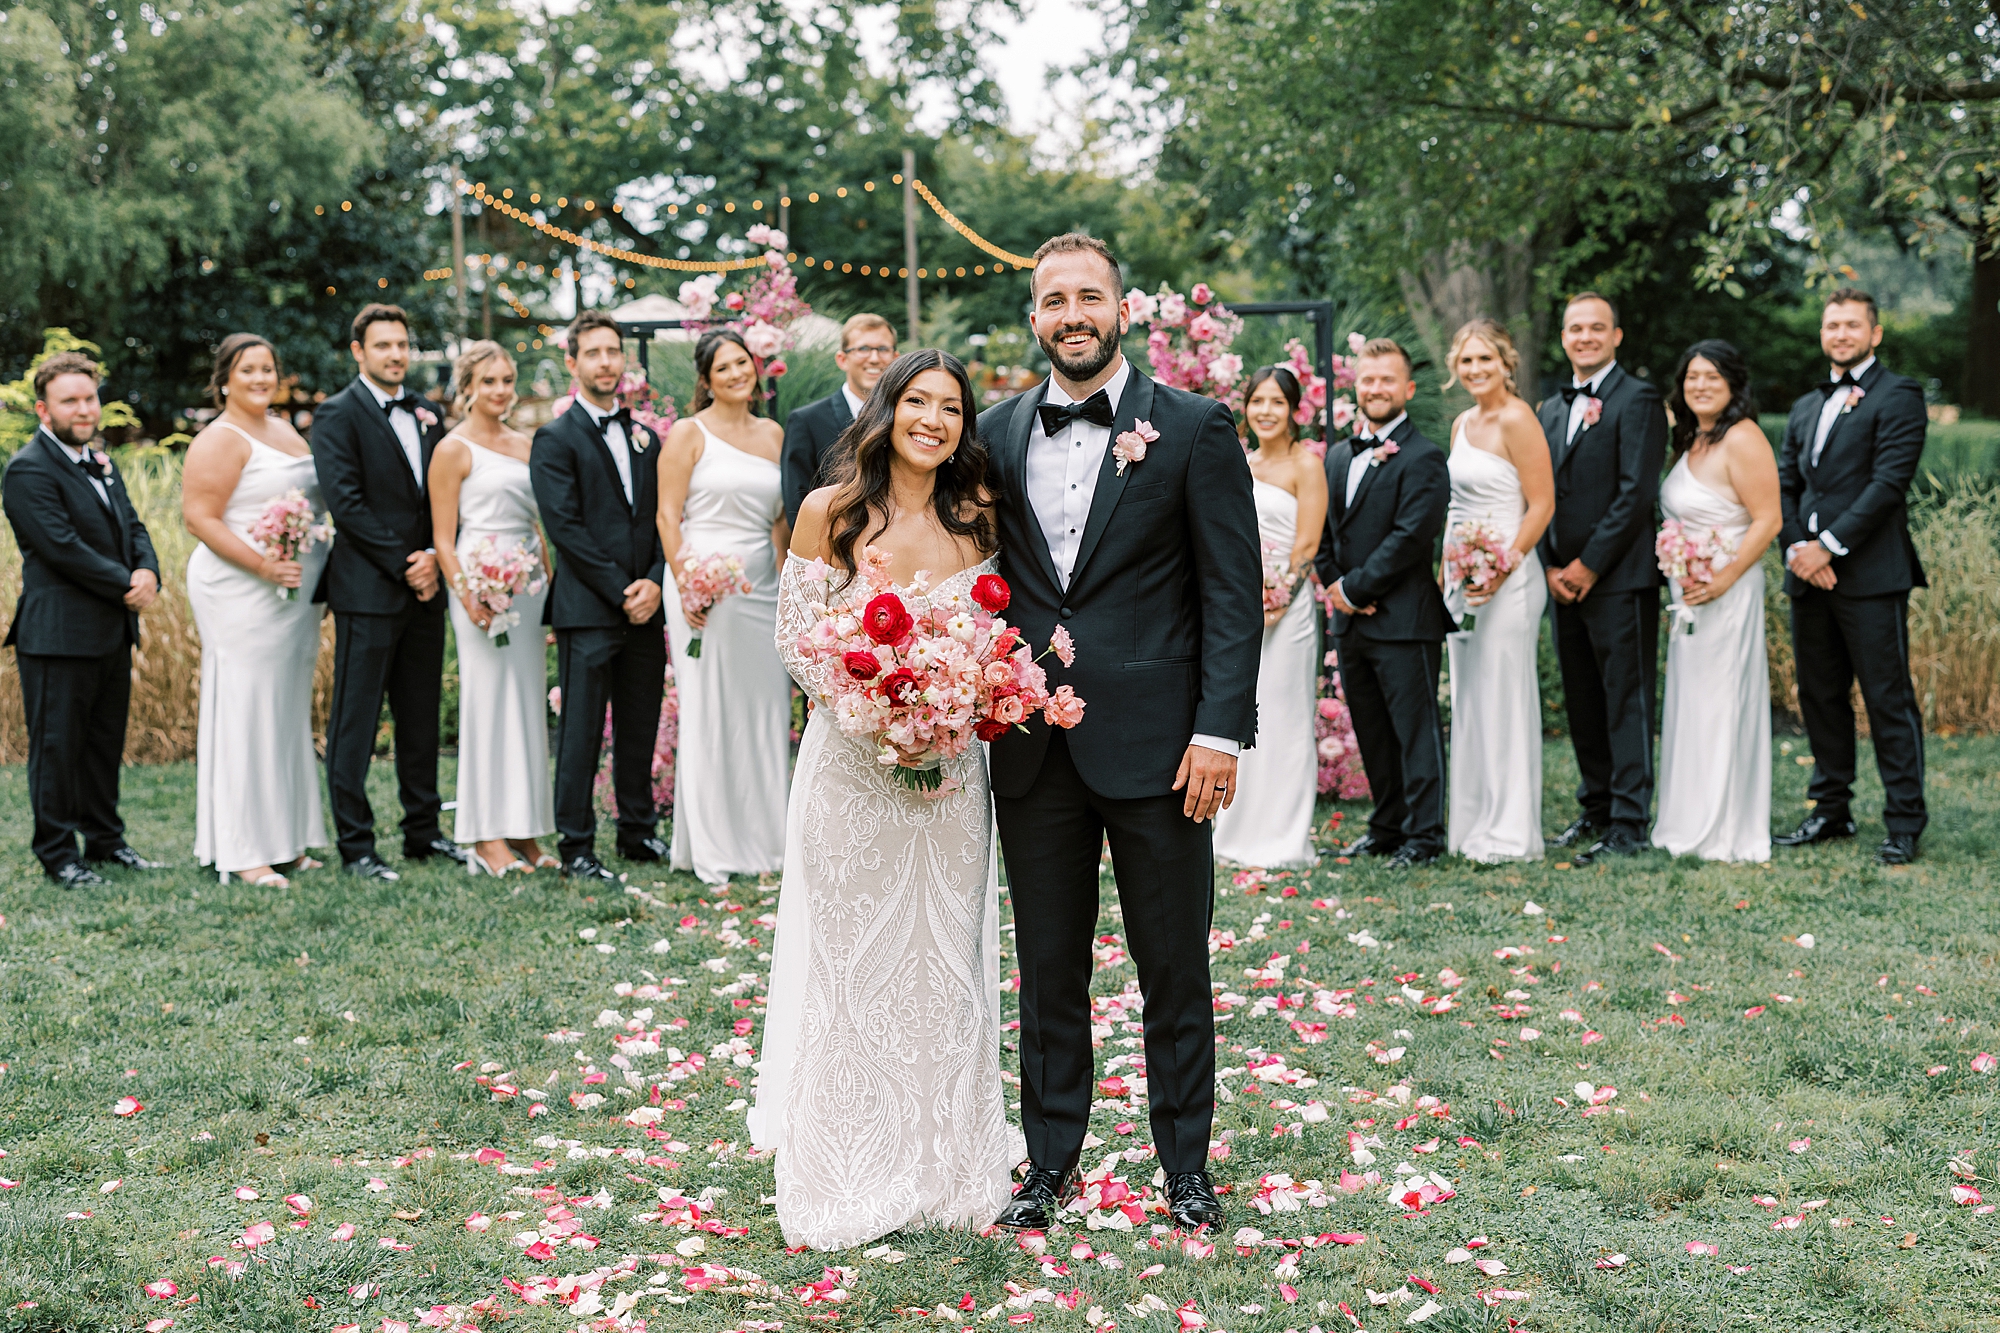 bride and groom stand together in front of wedding party in black and white 